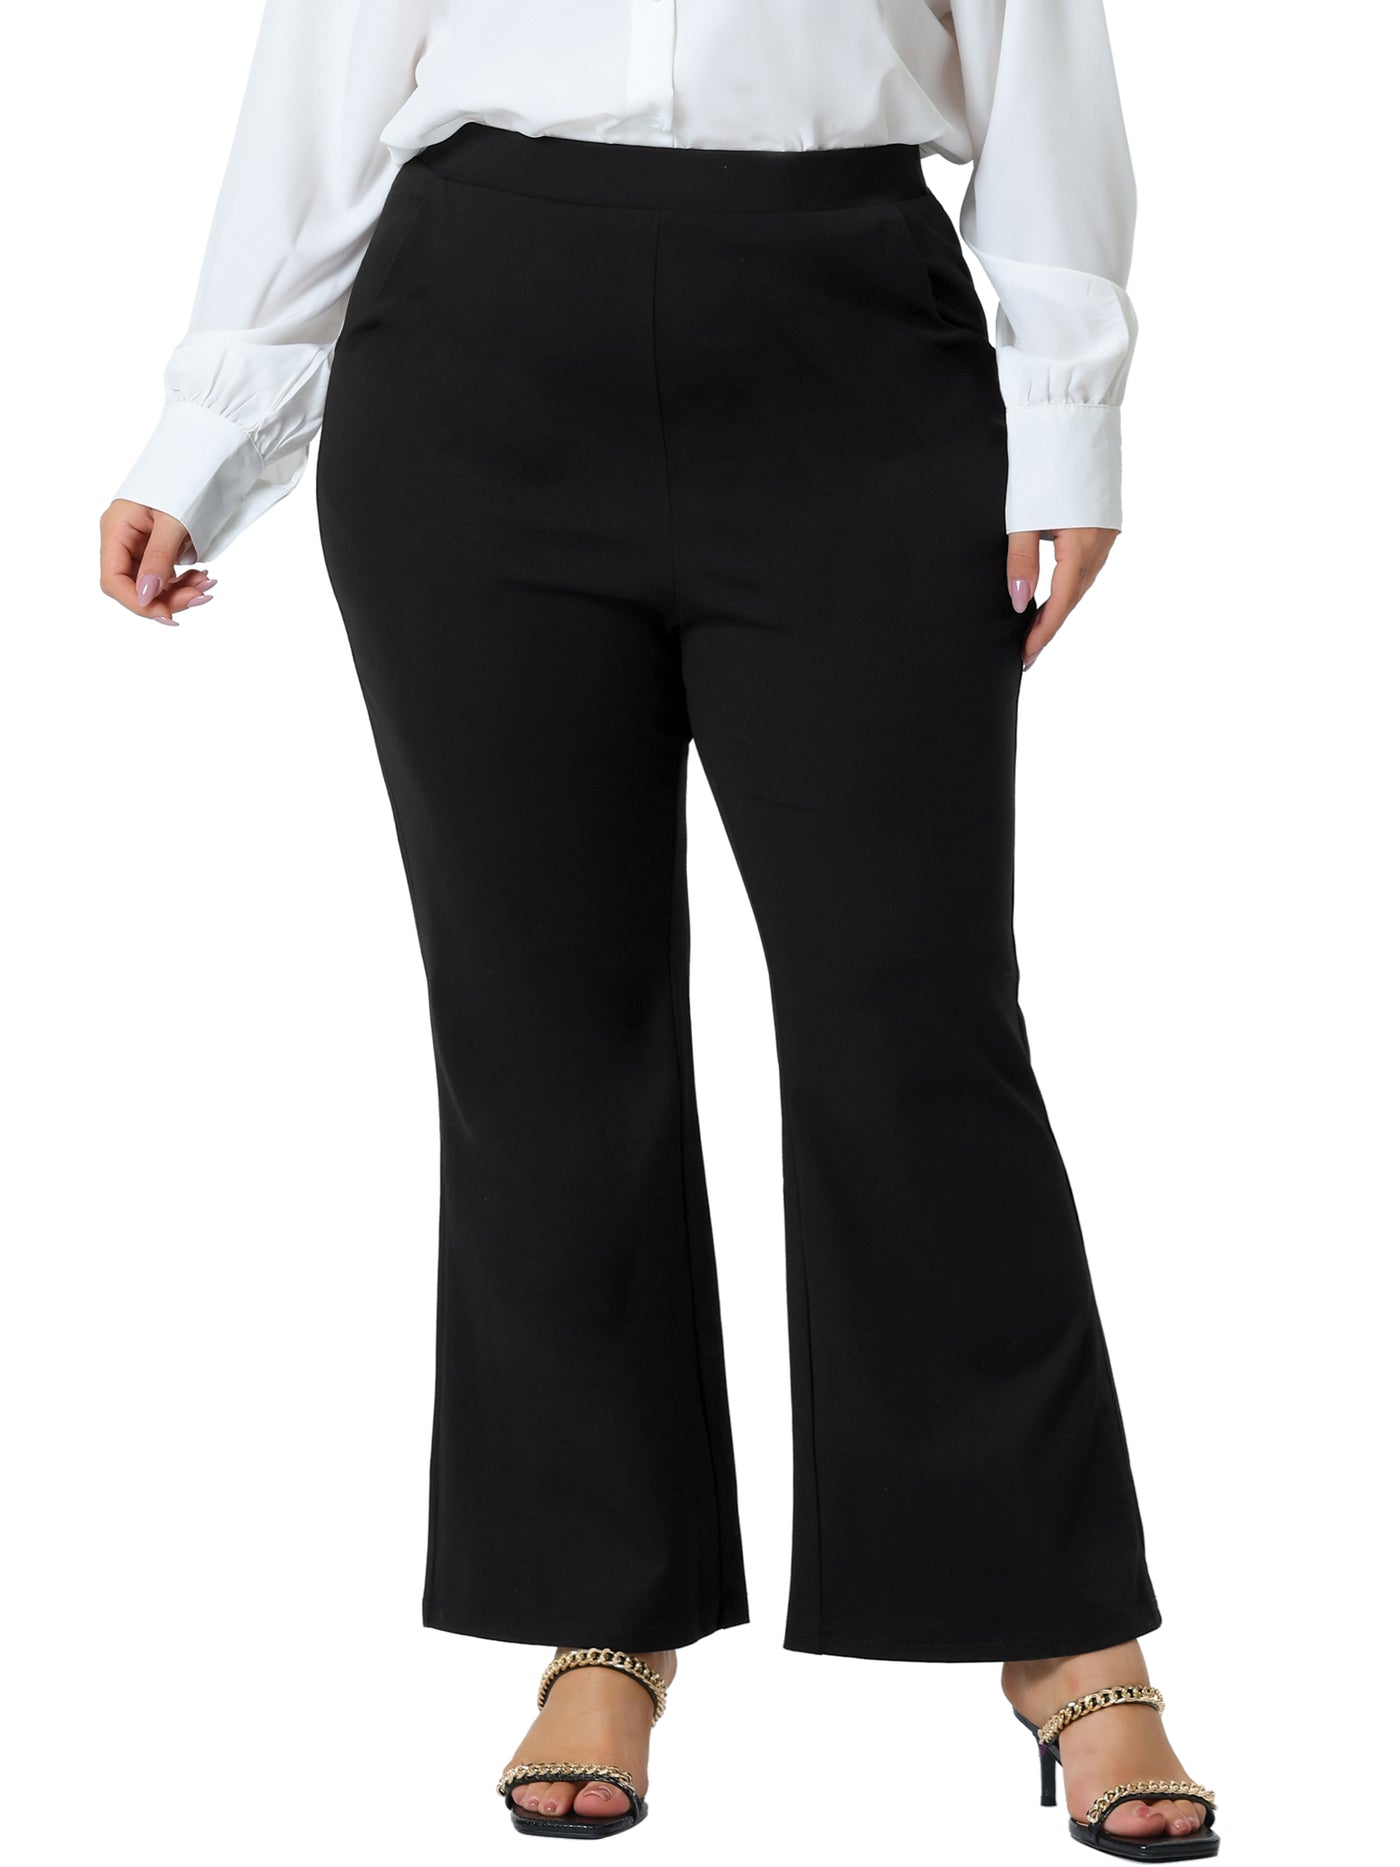 Bublédon Plus Size Bell Bottom Flare Leg Stretchy High Waist with Pockets Long Pant